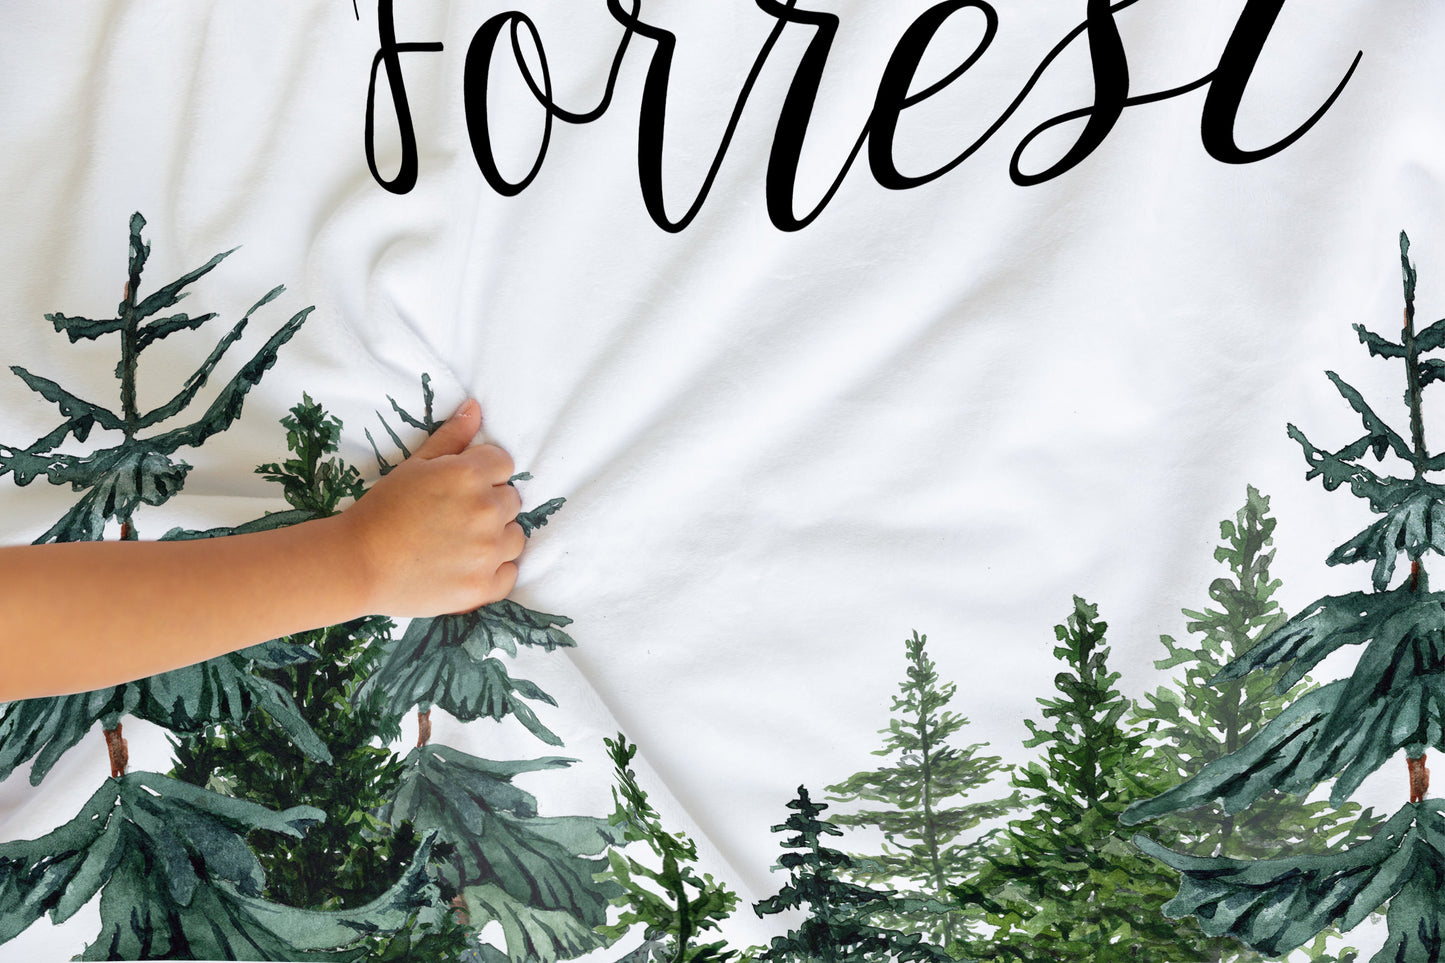 Pine Trees Personalized Minky Blanket, Woodland Nursery Bedding - The Forest